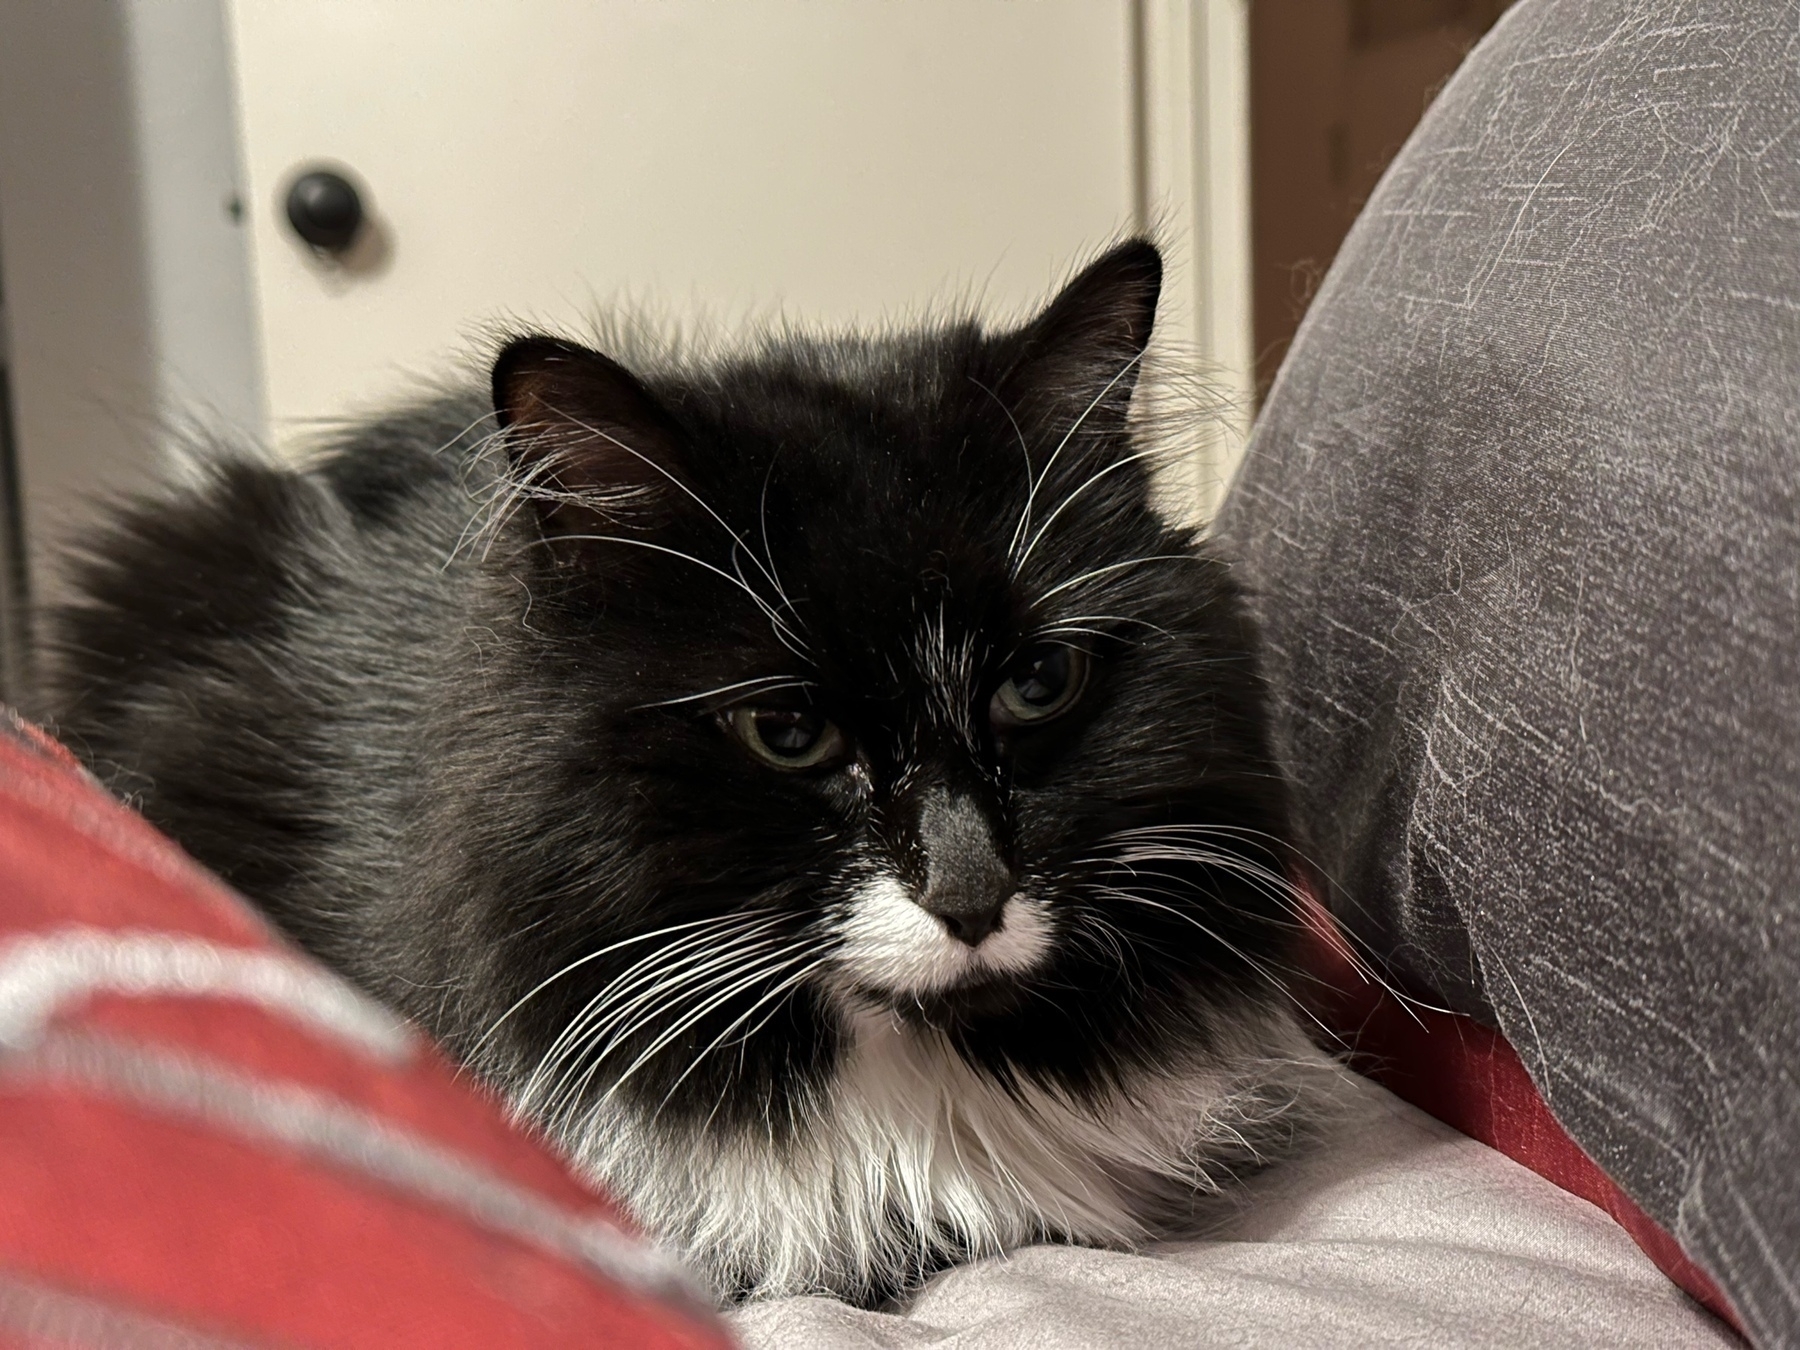 Black and white cat loaf (legs under her body) between a red and gray pillow on a cozy comforter